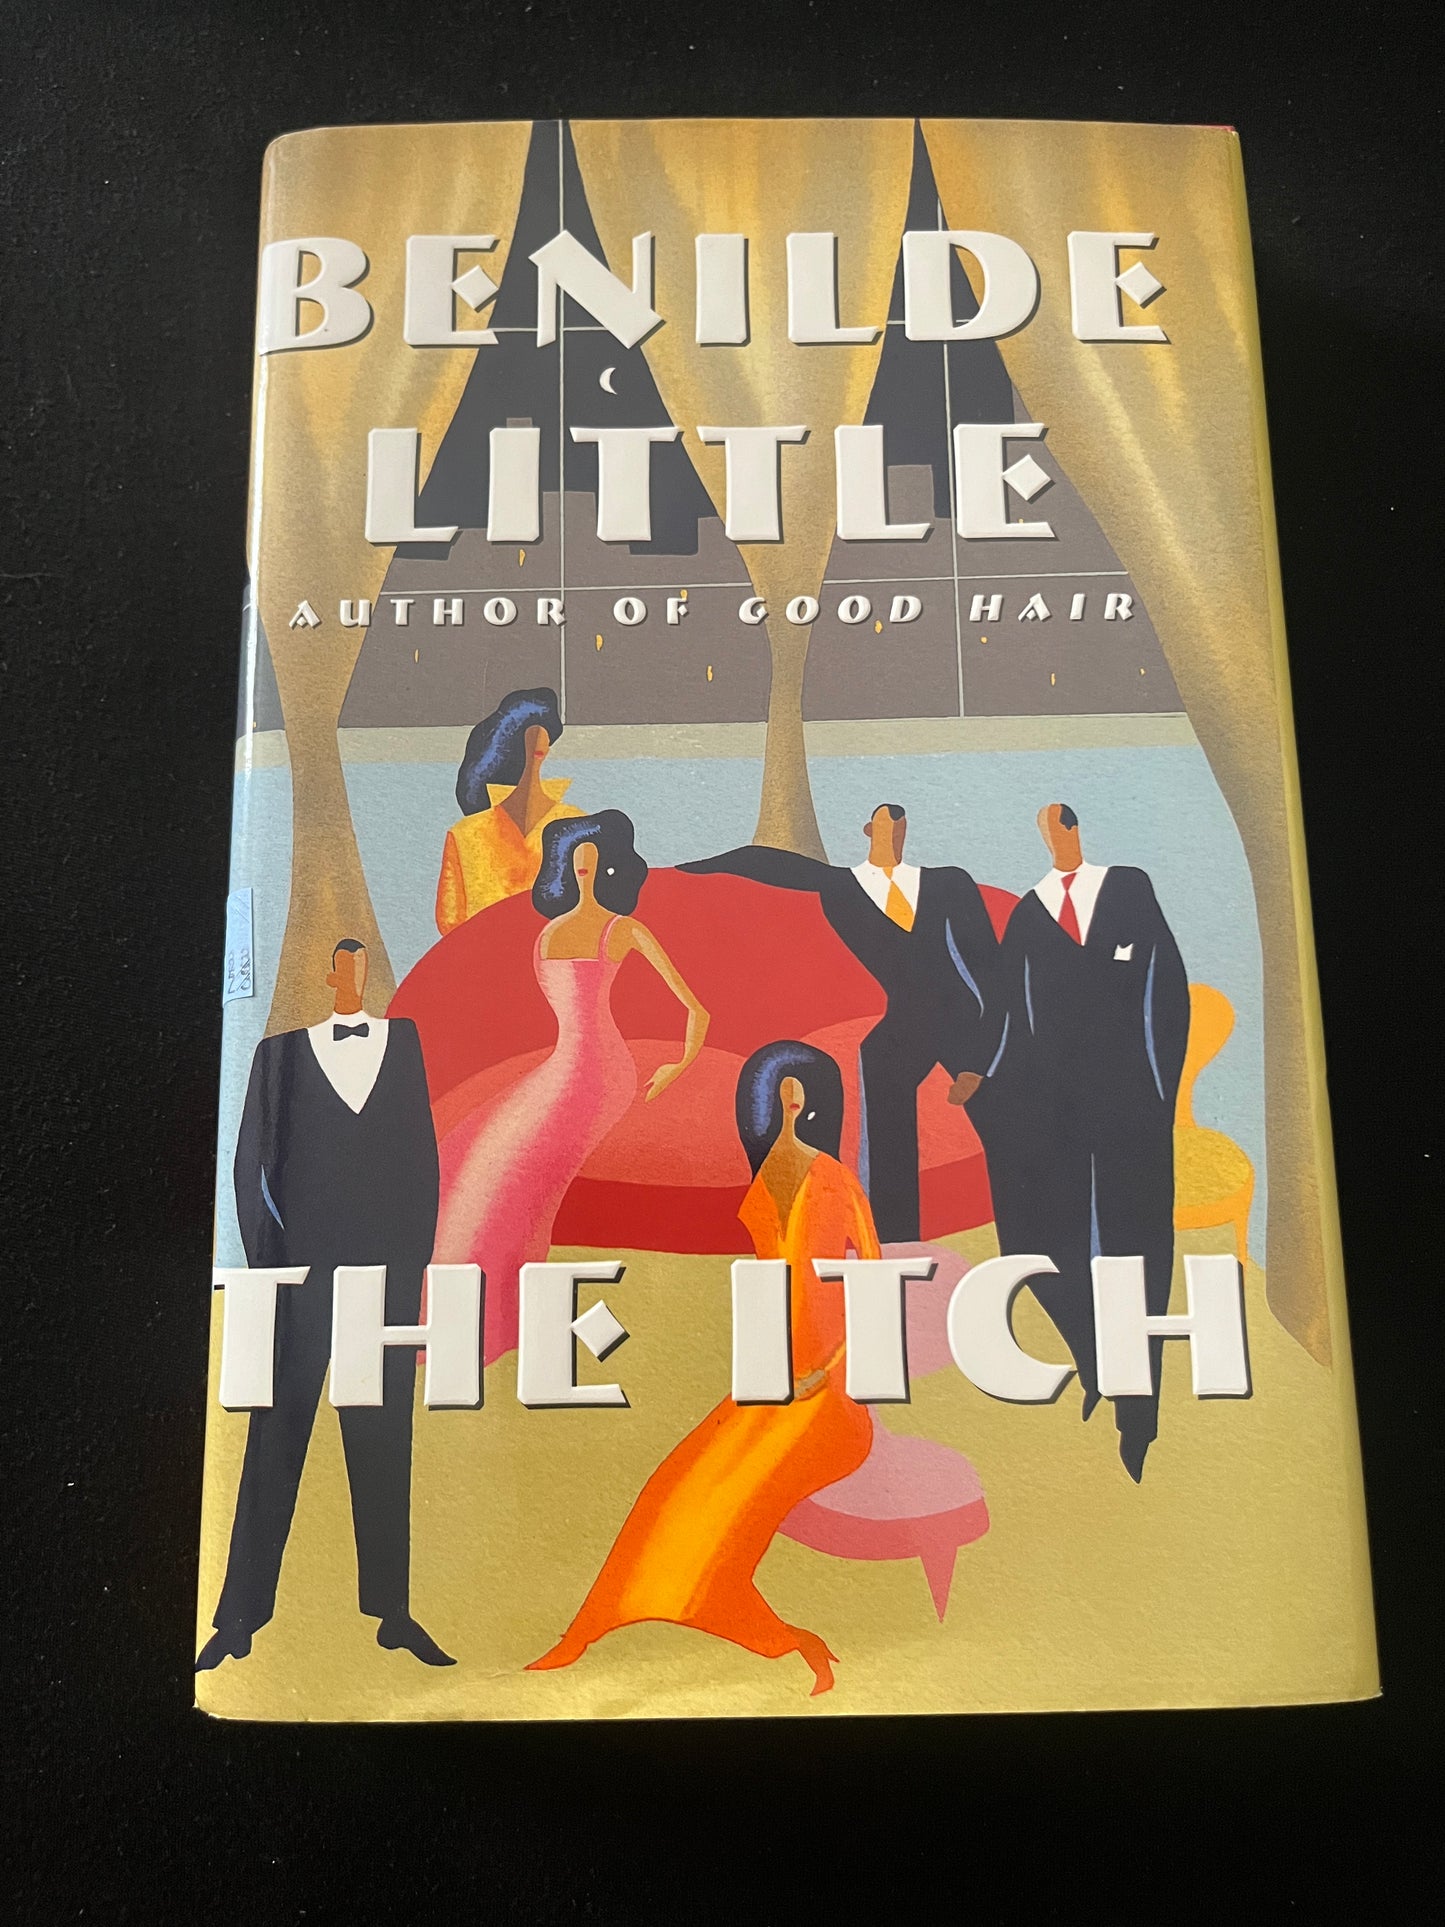 THE ITCH by Benilde Little